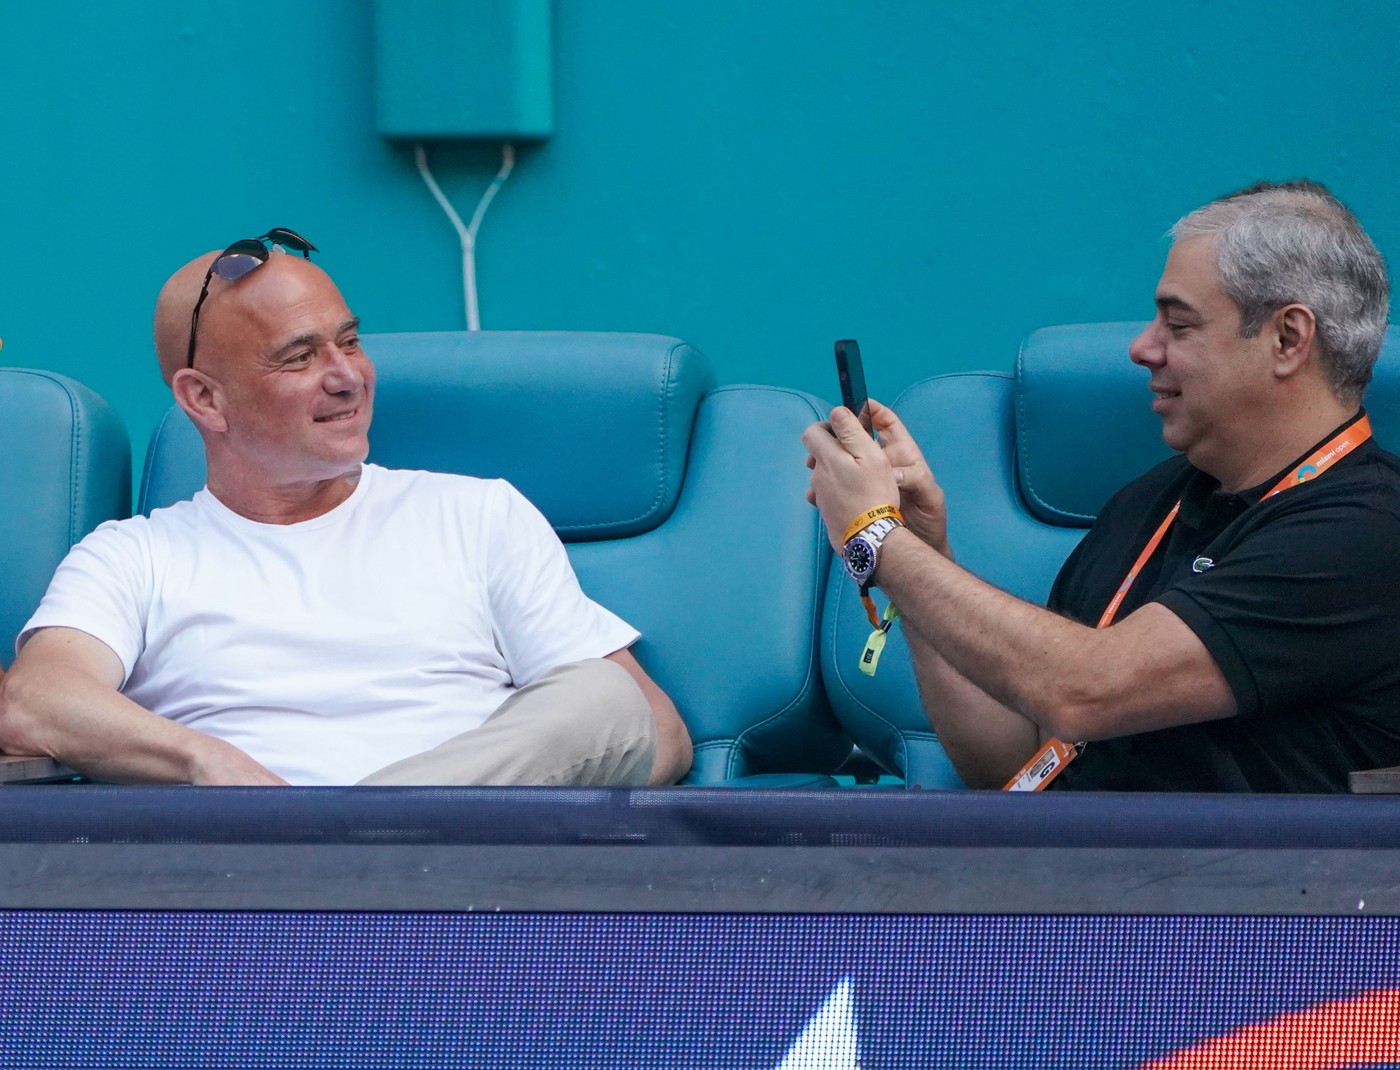 Andre Agassi attends 2024 Miami Open women's singles final match between Danielle Collins of United States and Elena Rybakina of Kazakhstan at Hard Rock Stadium on March 30, 2024 in Miami Gardens, Florida, United States
Andre Agassi attends 2024 Miami Open women's singles final match between Danielle Collins of United States and Elena Rybakina of Kazakhstan at Hard Rock Stadium, Hard Rock Stadium, Miami Gardens, Florida, United States - 30 Mar 2024,Image: 861687375, License: Rights-managed, Restrictions: , Model Release: no